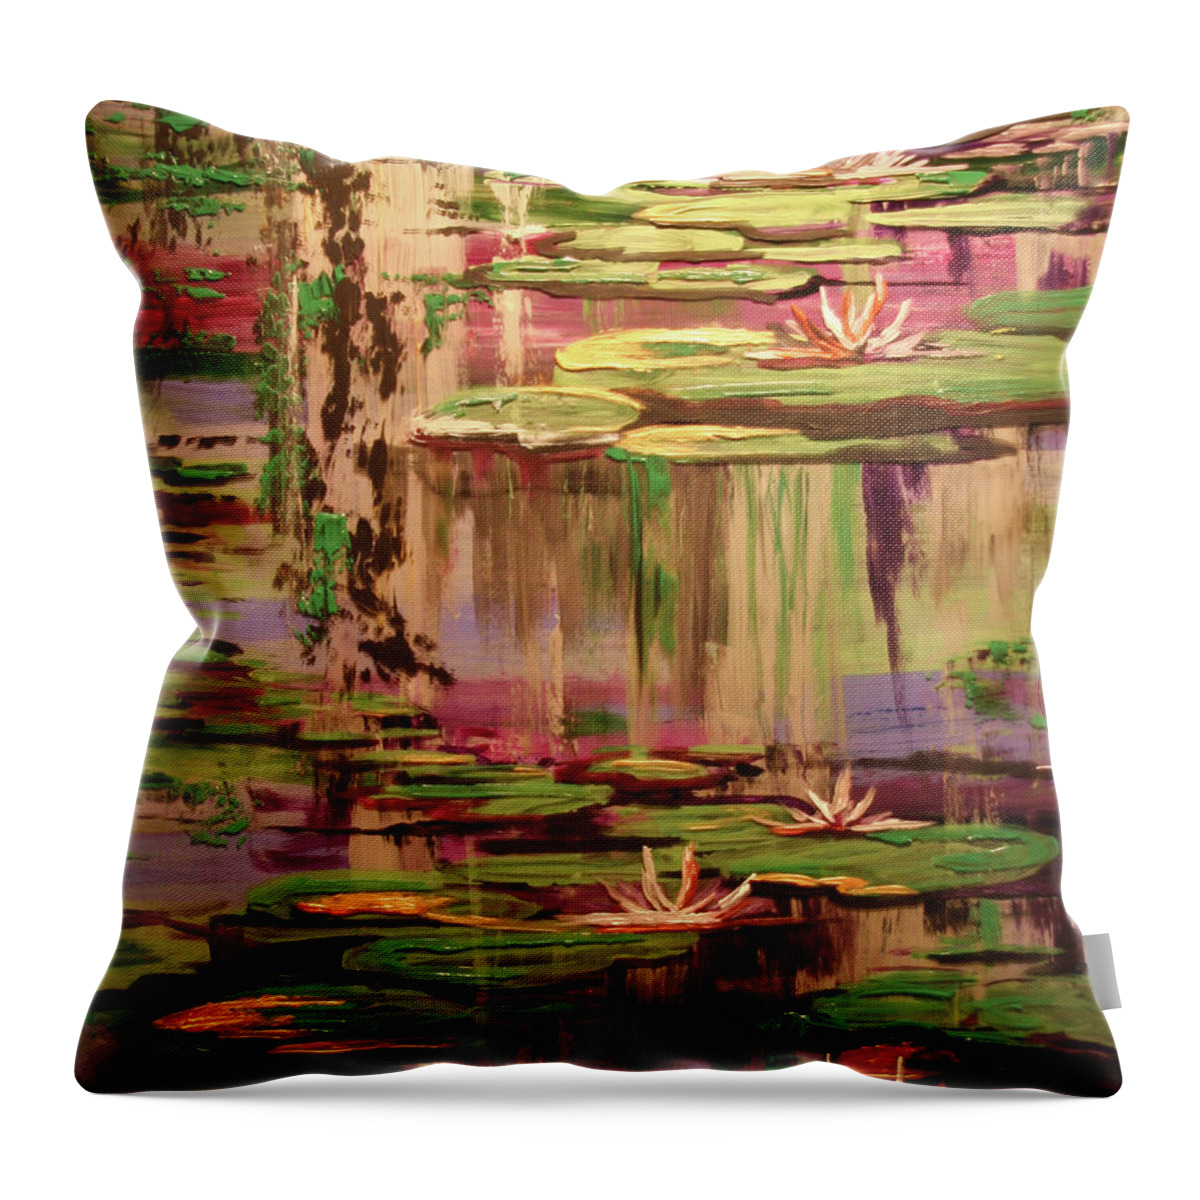 Water Throw Pillow featuring the painting Serenity by Marilyn Quigley